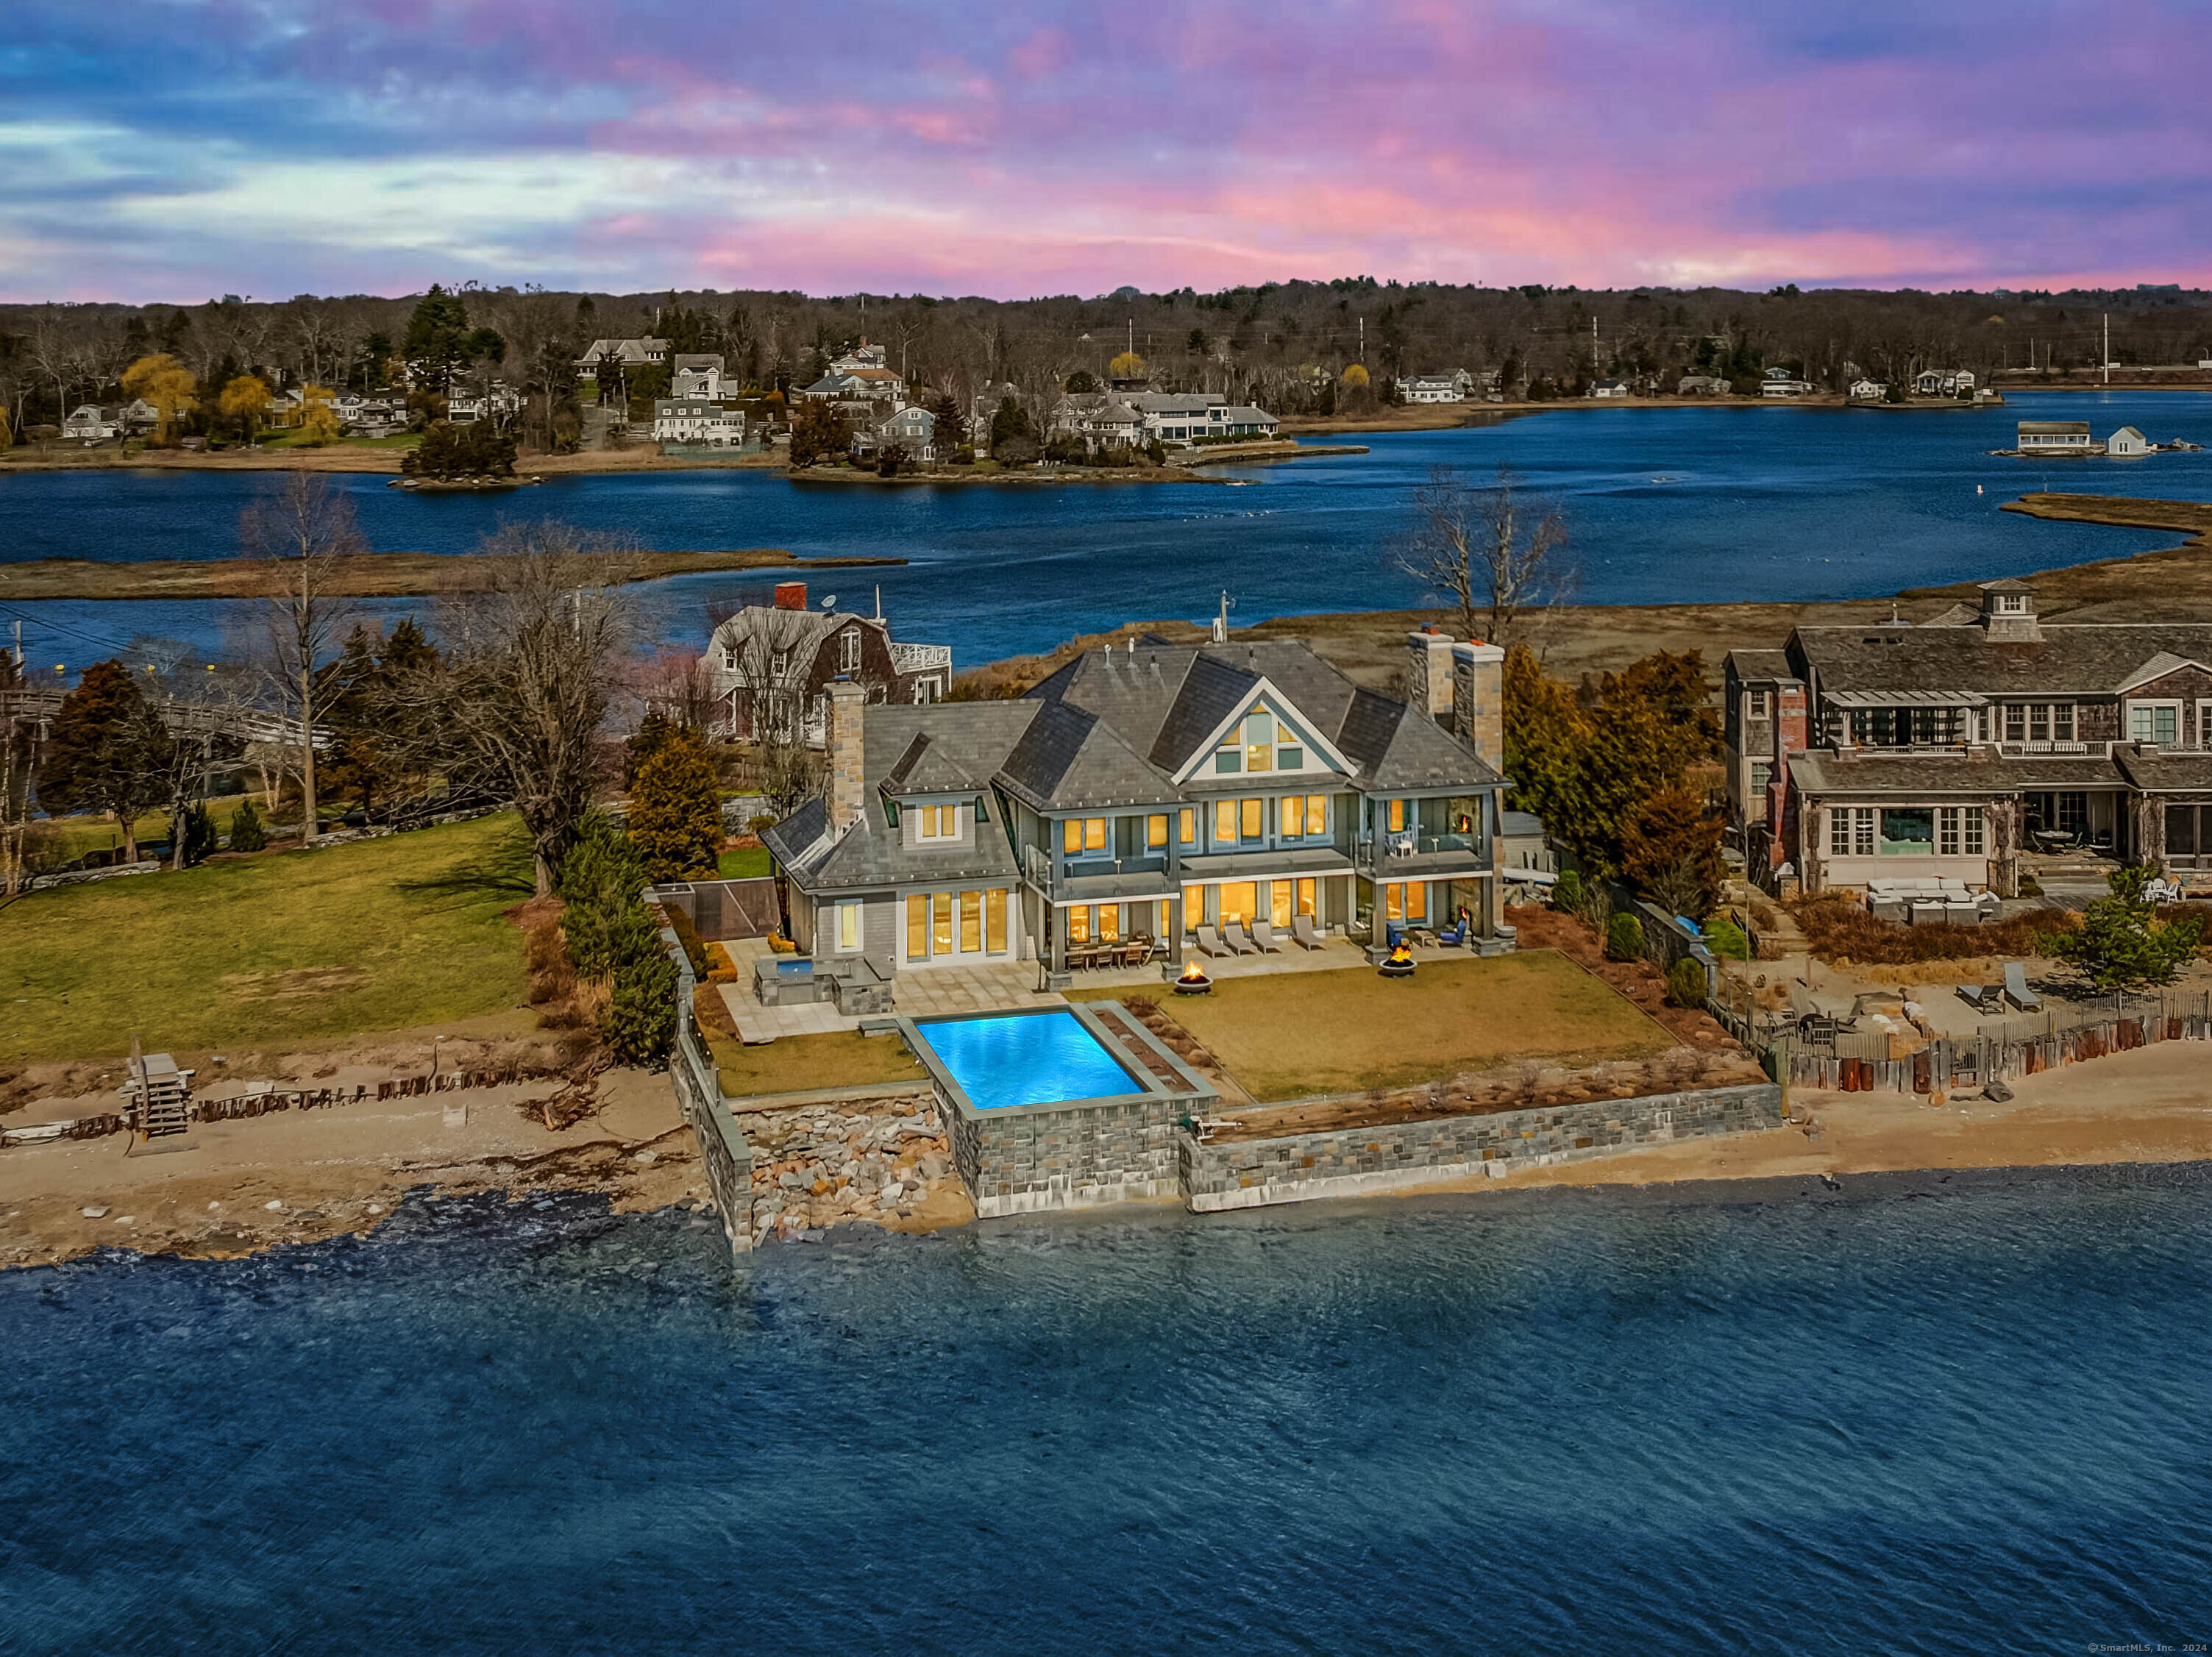 PRIVATE WATERFRONT PARADISE! Tranquil location offers unrivaled access to Panoramic Ocean views of Long Island Sound. A short walk across the Wooden Footbridge w/ Sherwood Mill Pond on your left and LI Sound on your right leads to the gated private Island of Compo Mill Cove & a handful of unique waterfront homes. The property itself has been customized from top to bottom w/ exceptional thought & detail. Only house on the Cove w/ a secure, storm surge concrete wall. Featuring over 3950 sq ft of living space, 5 beds, 5.2 baths, an open floor plan w/ wall to wall windows that offer 180 degree views of the ocean from every room. First fl features a living room w/ fireplace, family room, beautifully appointed wet bar, dining area, & gourmet kitchen w/ exclusive granite, Viking appliances, modern design, & a first fl bedroom w/ ensuite bath. Upstairs offers 3 additional bedrooms including a primary w/ a fireplace, private balcony w/ outdoor fireplace, & bathroom w/ sauna shower, tub, & double vanity. The highest quality materials were used in every corner of the home, from beautiful marble to custom imported Italian sici tiles, to state of the art electronic & digital components that can be used from within the home or remotely no detail was overlooked. Outdoors is equally as impressive w/ an infinity pool, outdoor kitchen, shower, bathroom, terrace w/ fireplace, lush gardens, fountains & impeccable landscaping that sit behind a gated, secure stone wall border. Just 1 hr from NYC!